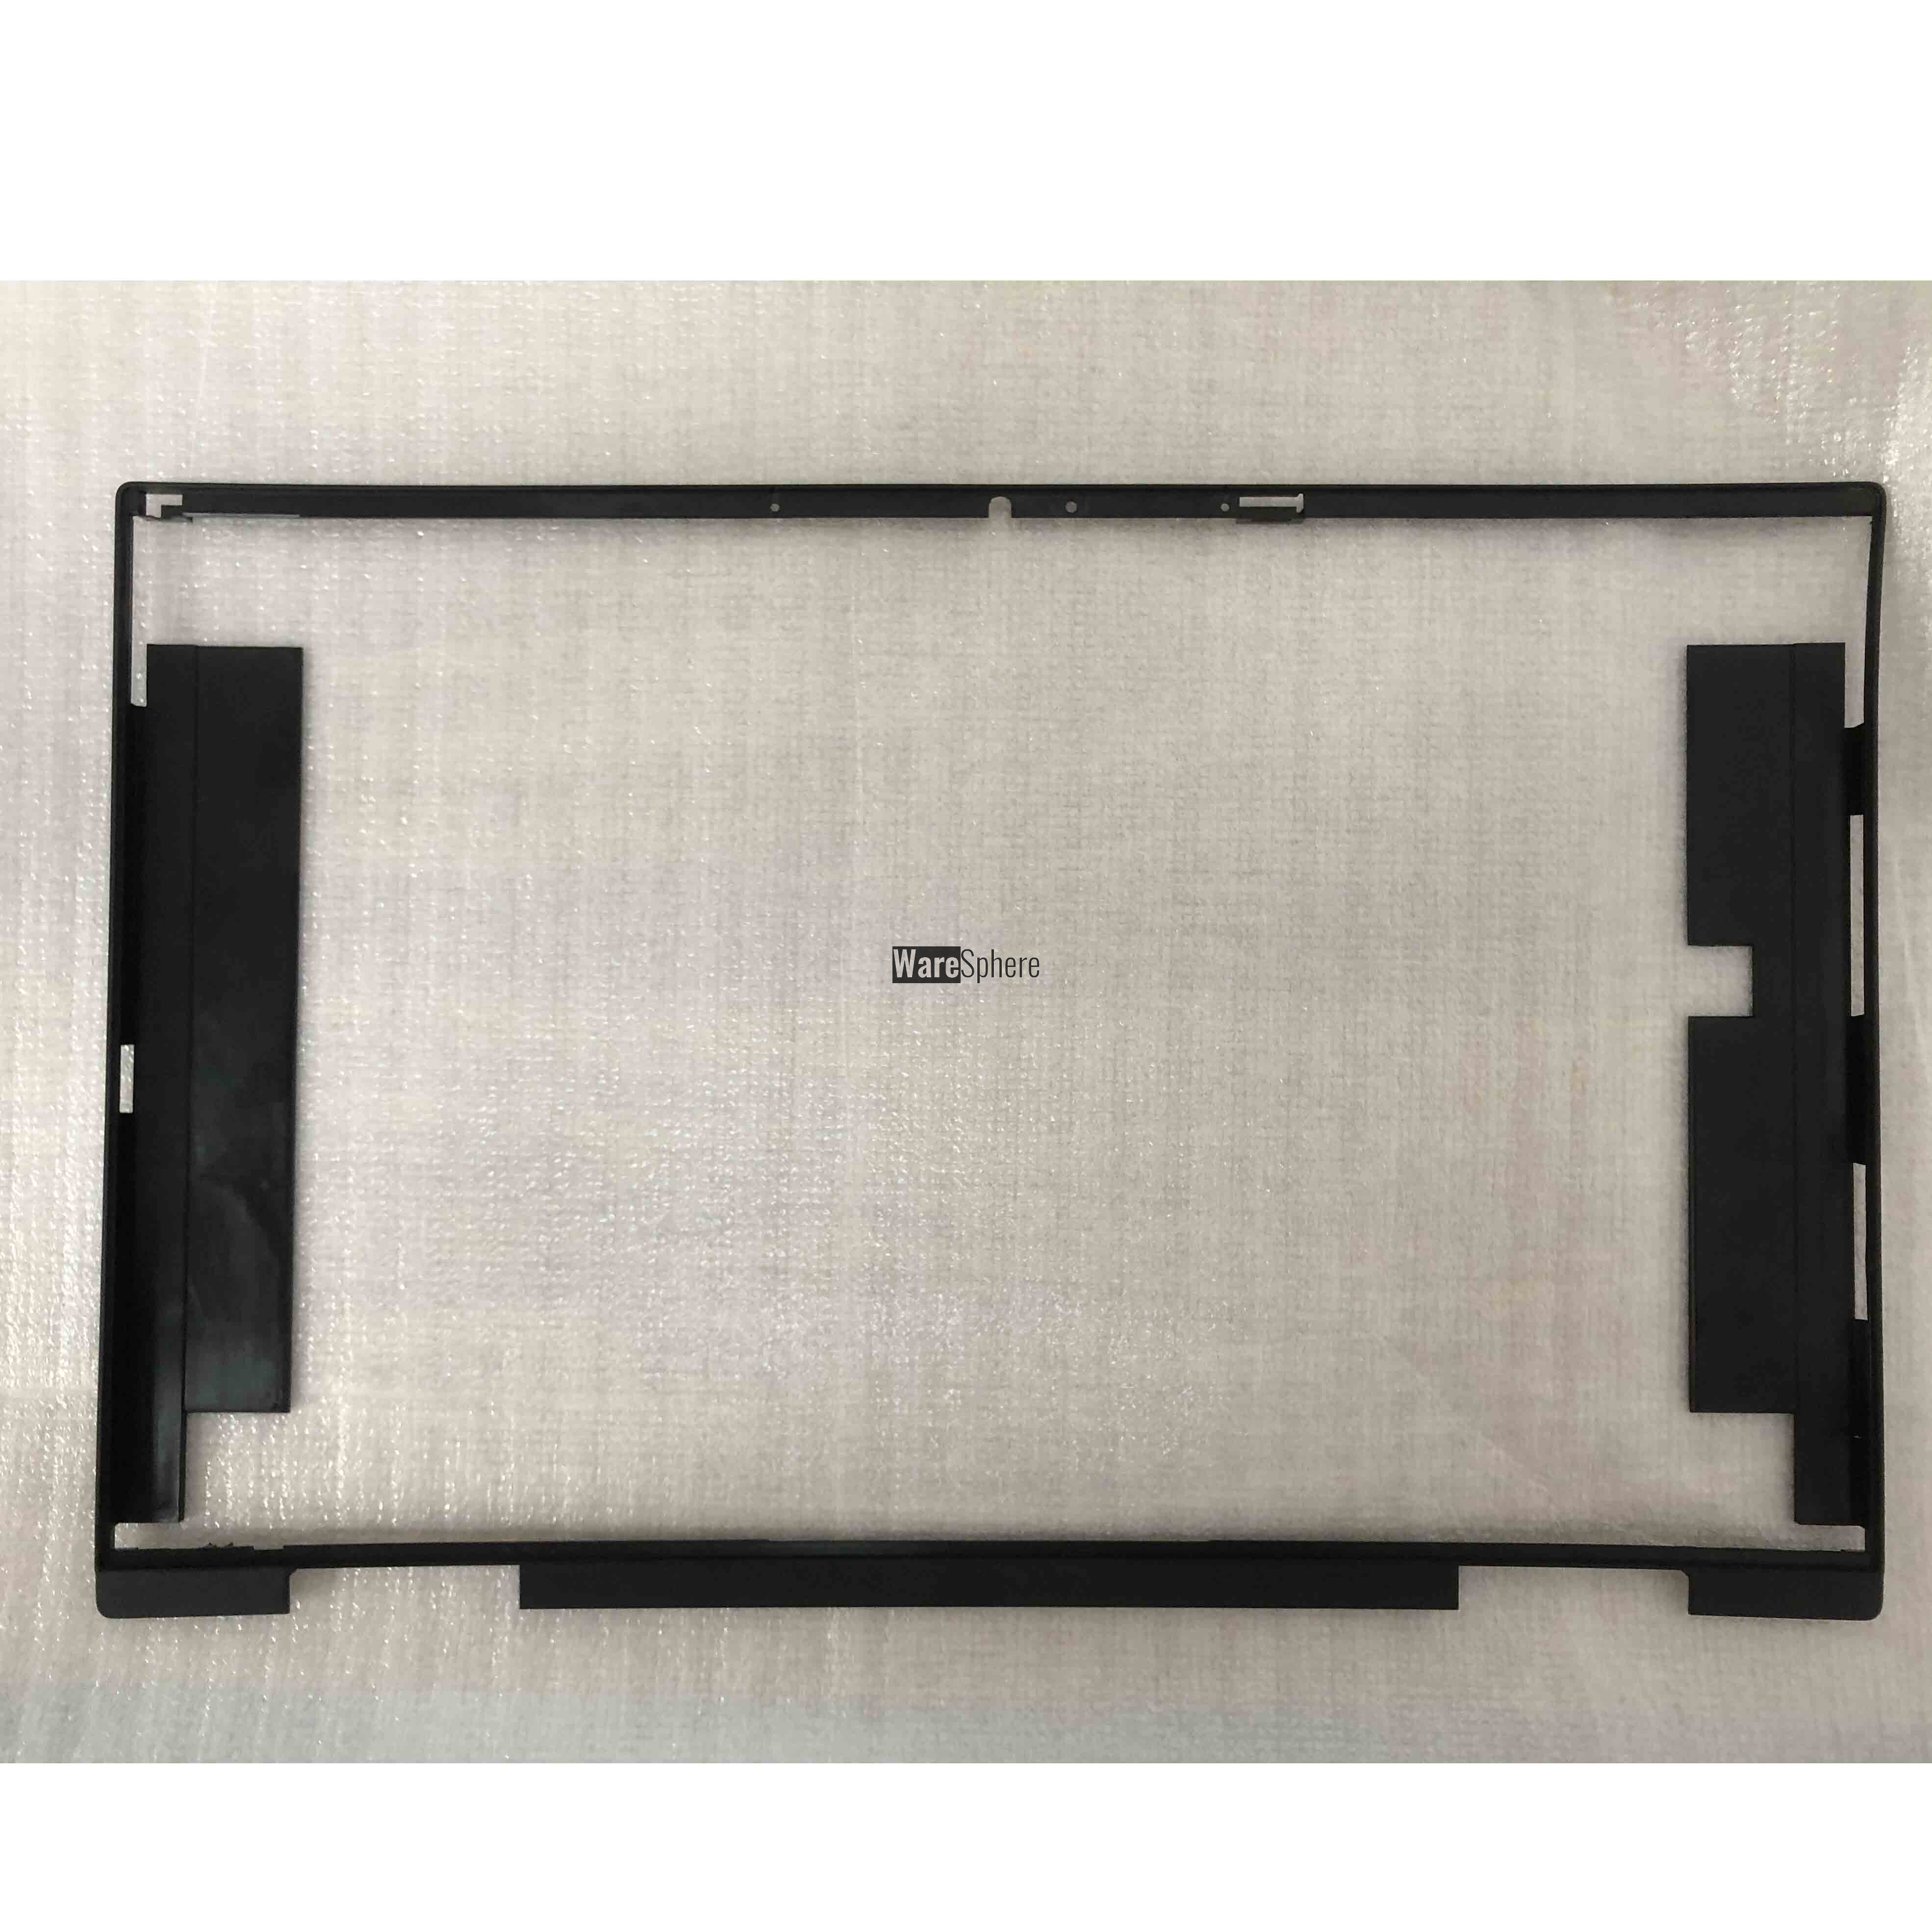 LCD Front Bezel for HP PAVILION X360 14-DY 4600MQ030002 AIR